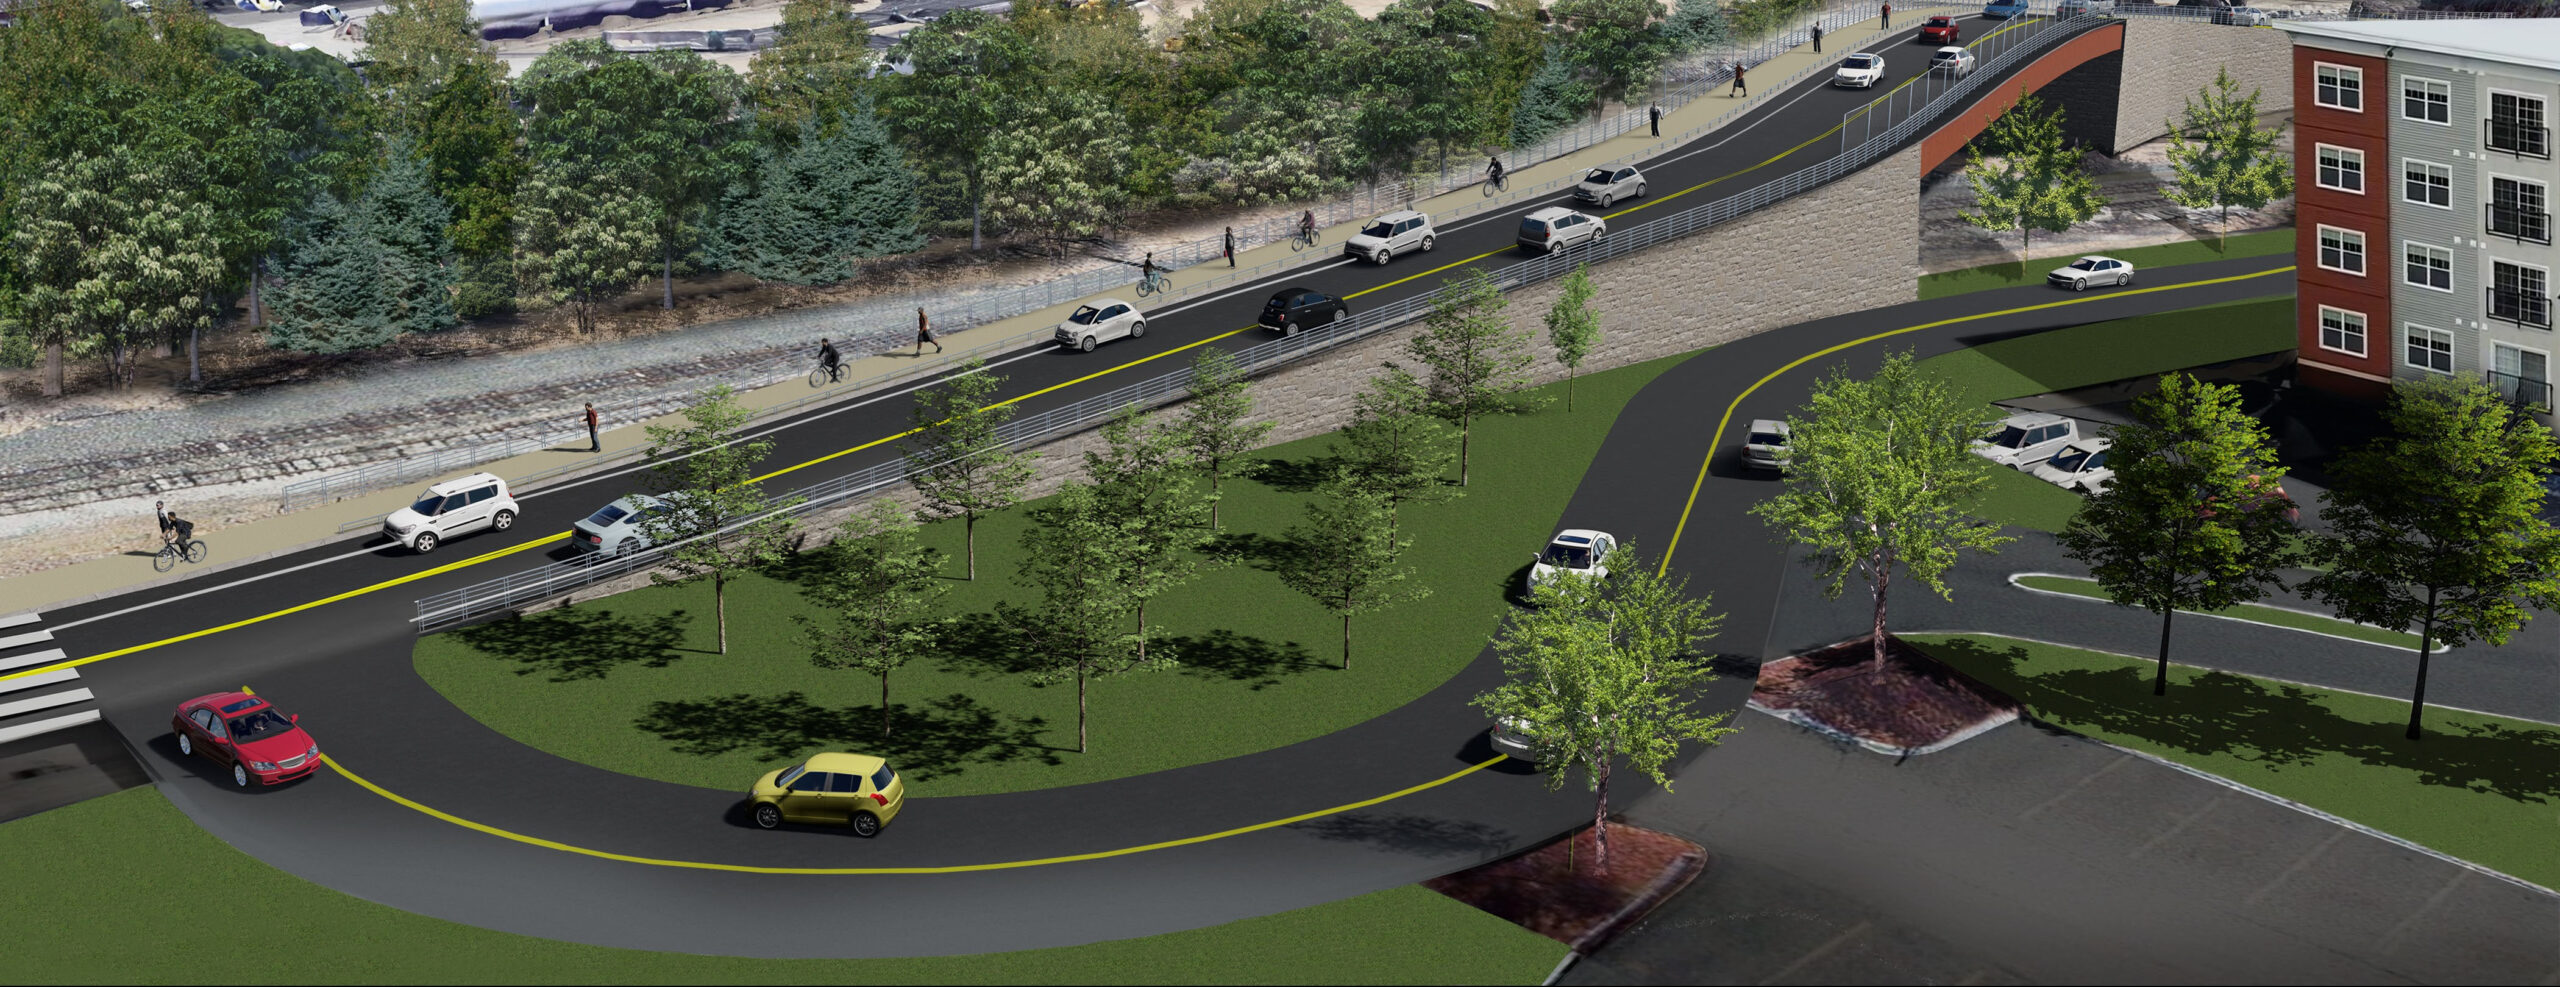 Alongside a new pedestrian bridge over Granite Street, a new roadway connector from Elm Street to Willow Street, a completed half-mile of rail trail and a new ‘peanut roundabout’ on South Willow Street, the biggest part of RAISE Manchester will be a new South Commercial Street Extension (pictured) that extends south from the Northeast Delta Dental Stadium area to a new bridge that offers egress over the active CSX rail line, even during active train crossings.